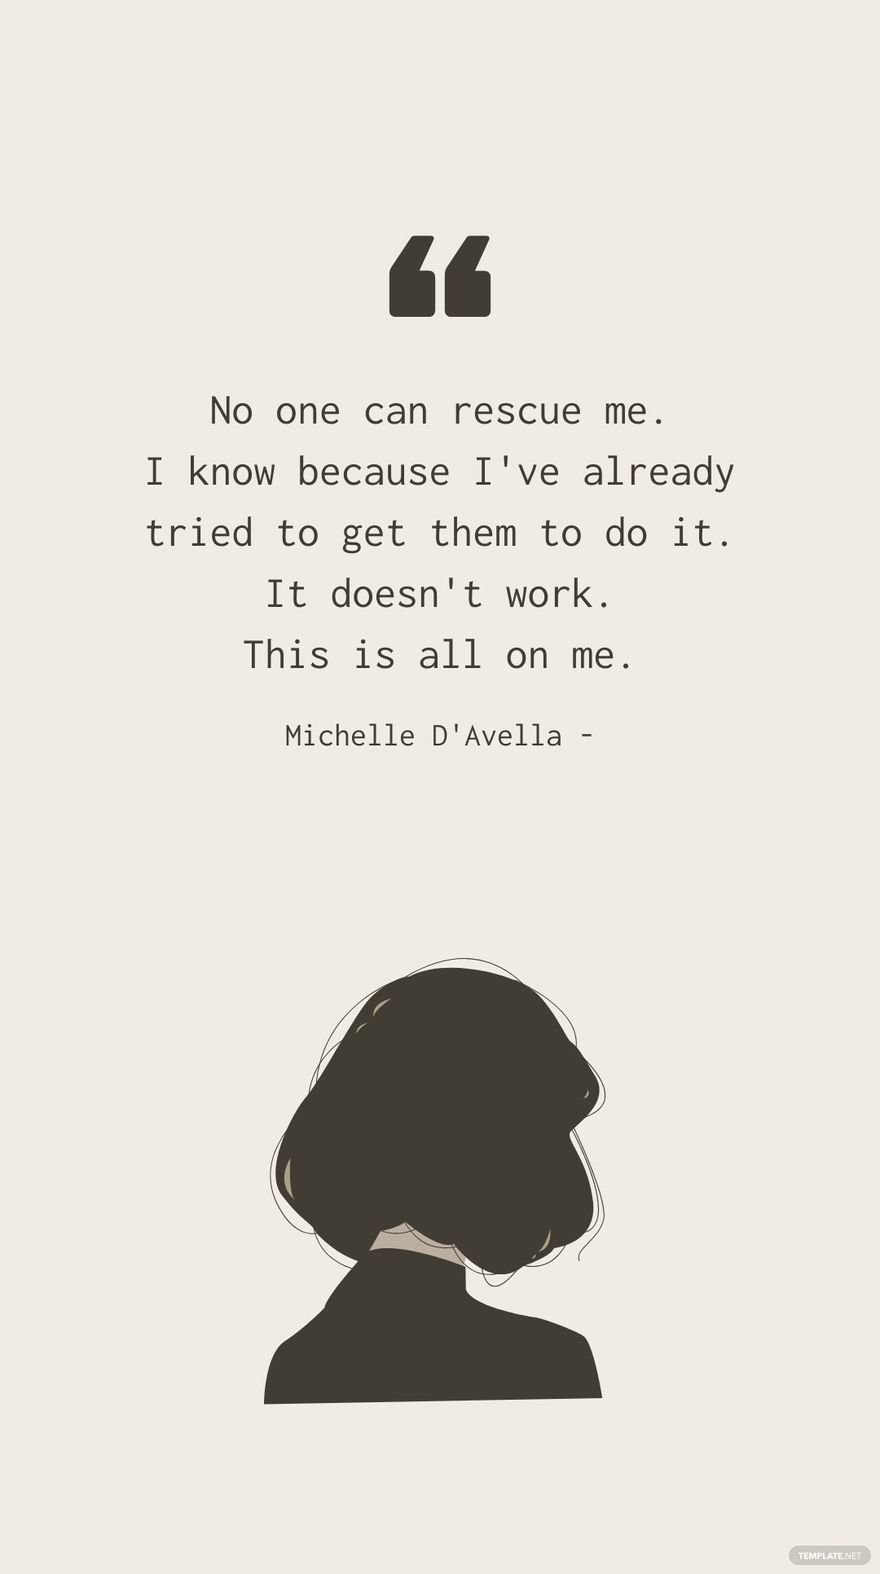 Free Michelle D'Avella - No one can rescue me. I know because I've already tried to get them to do it. It doesn't work. This is all on me. in JPG